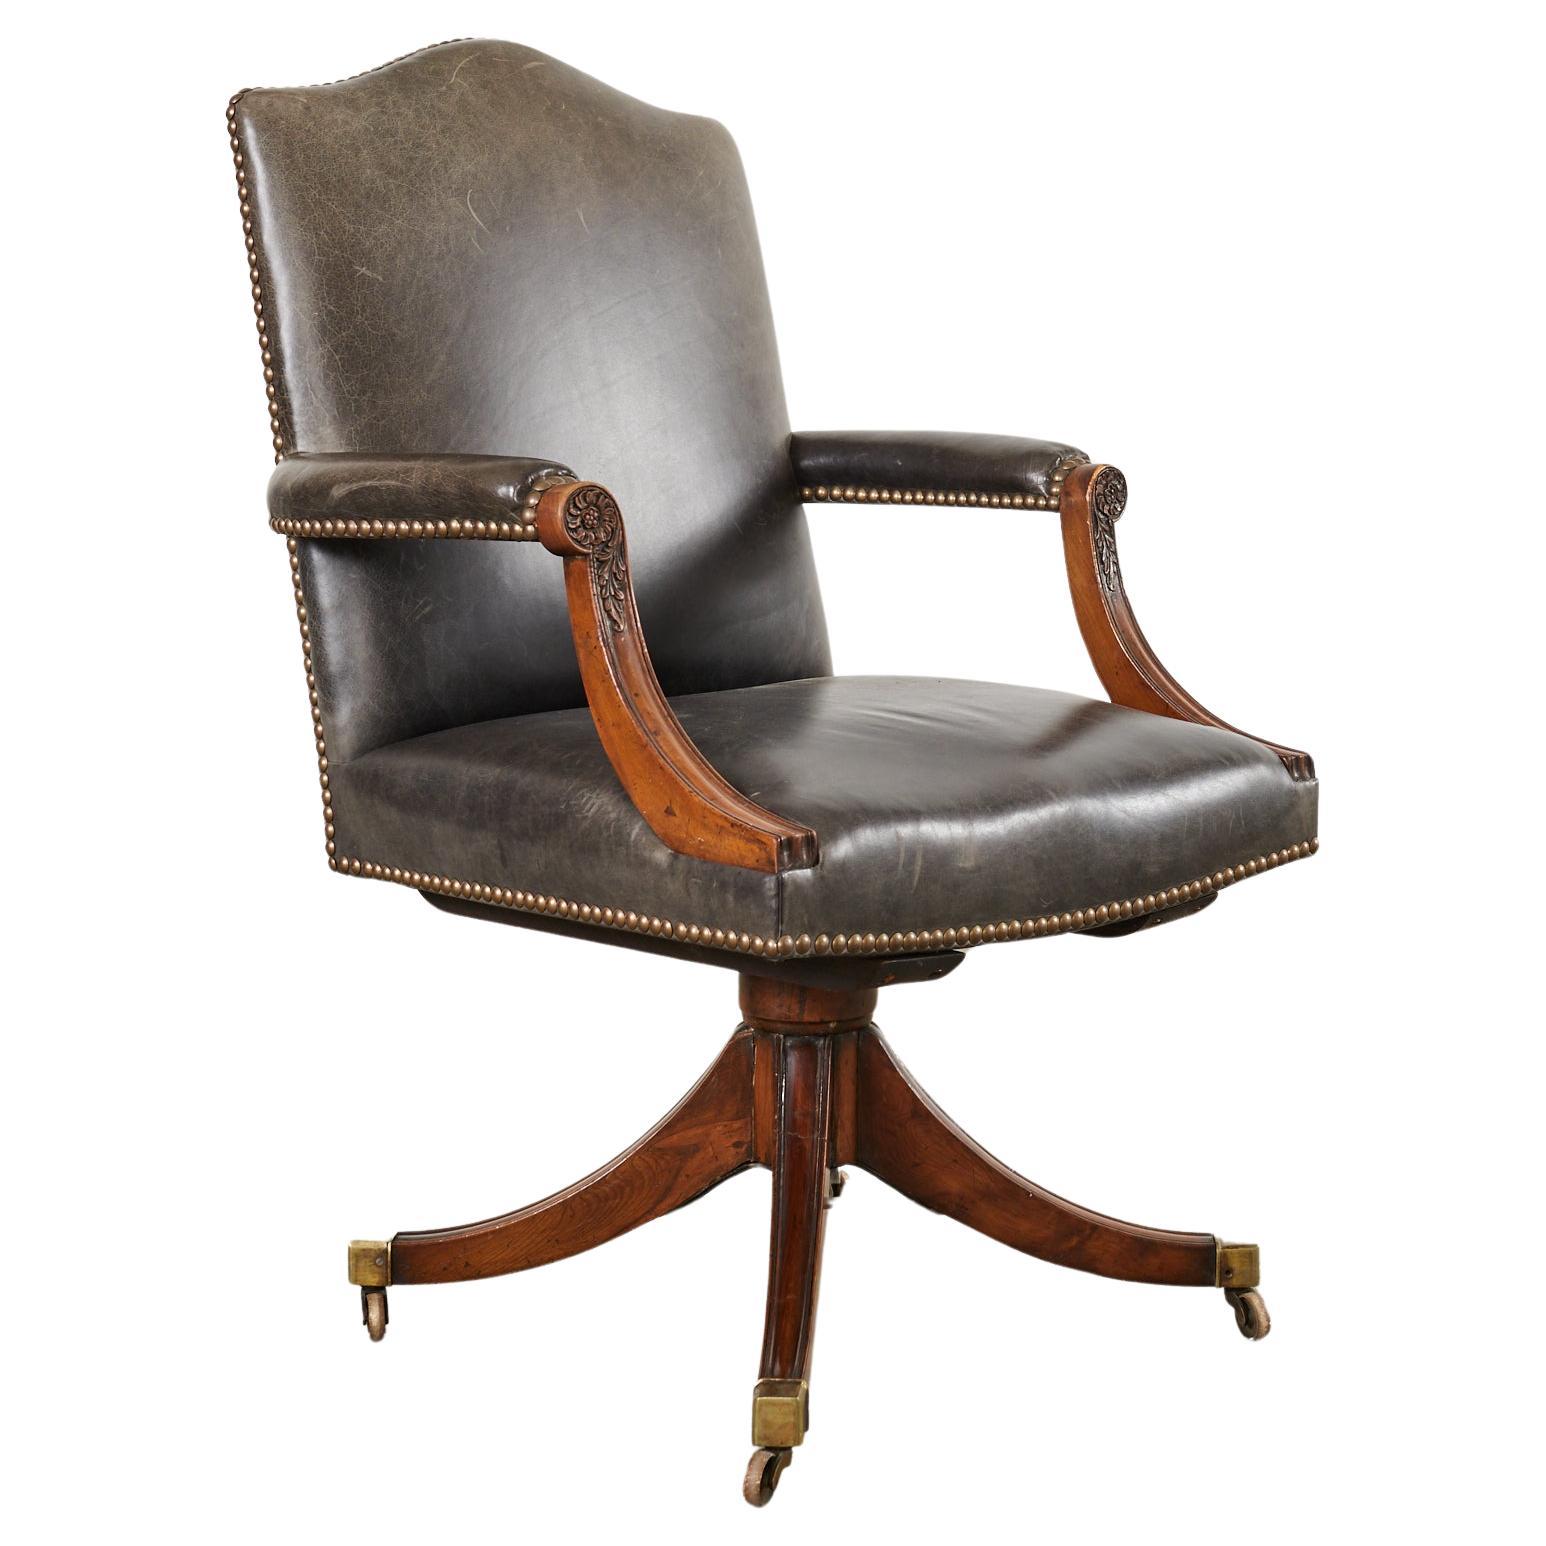 Titchmarsh & Goodwin English Georgian Style Executive Office Chair For Sale